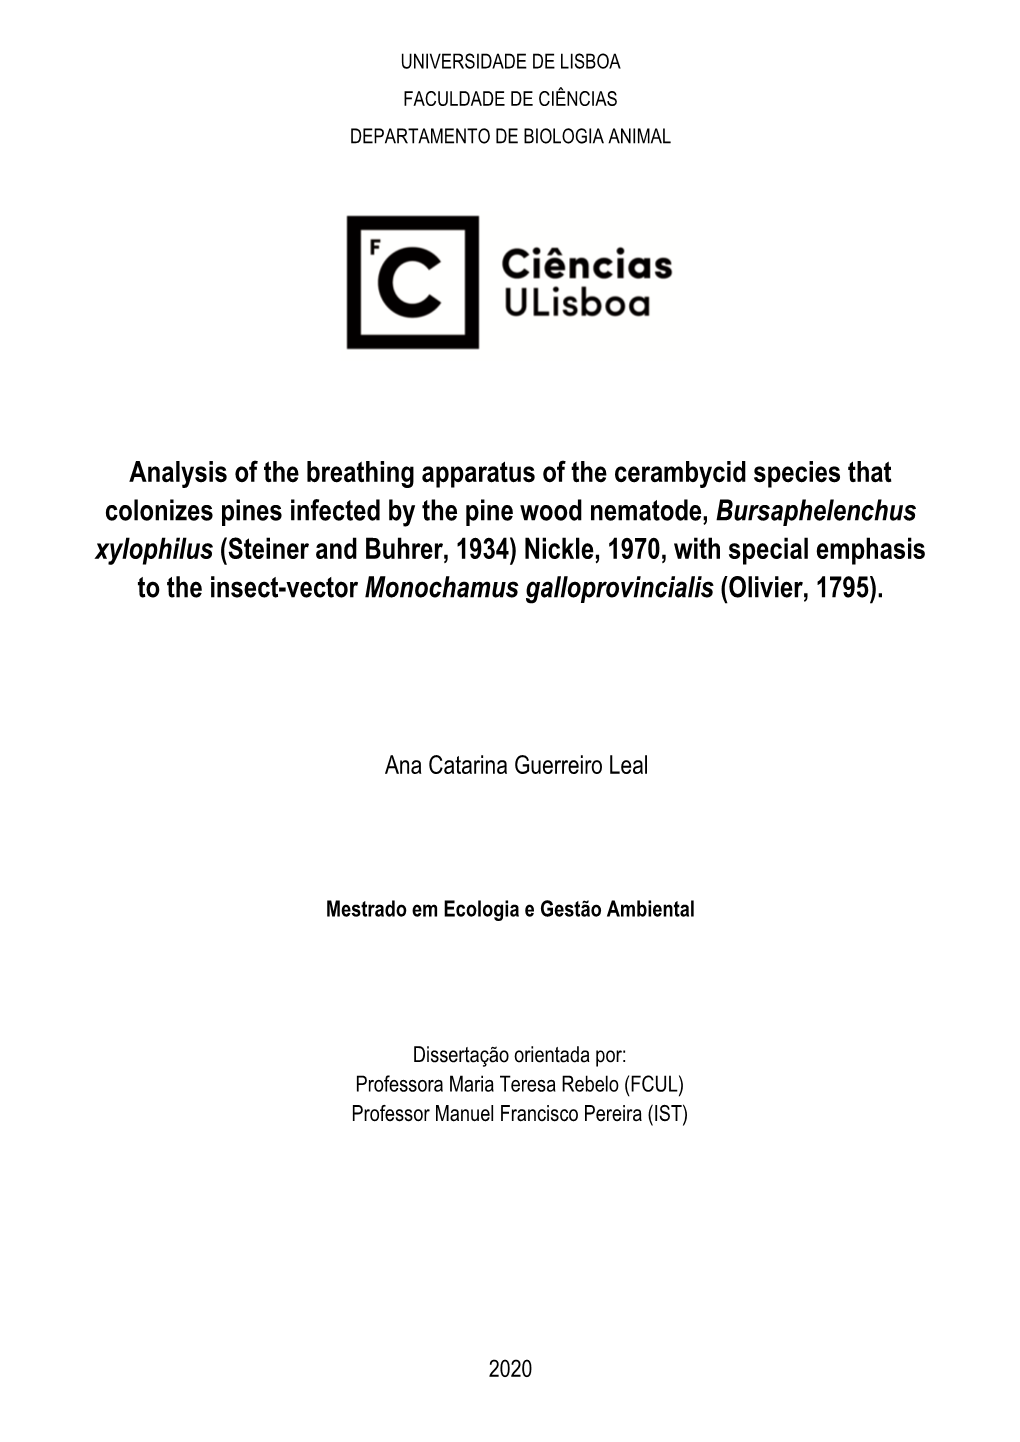 Analysis of the Breathing Apparatus of the Cerambycid Species That